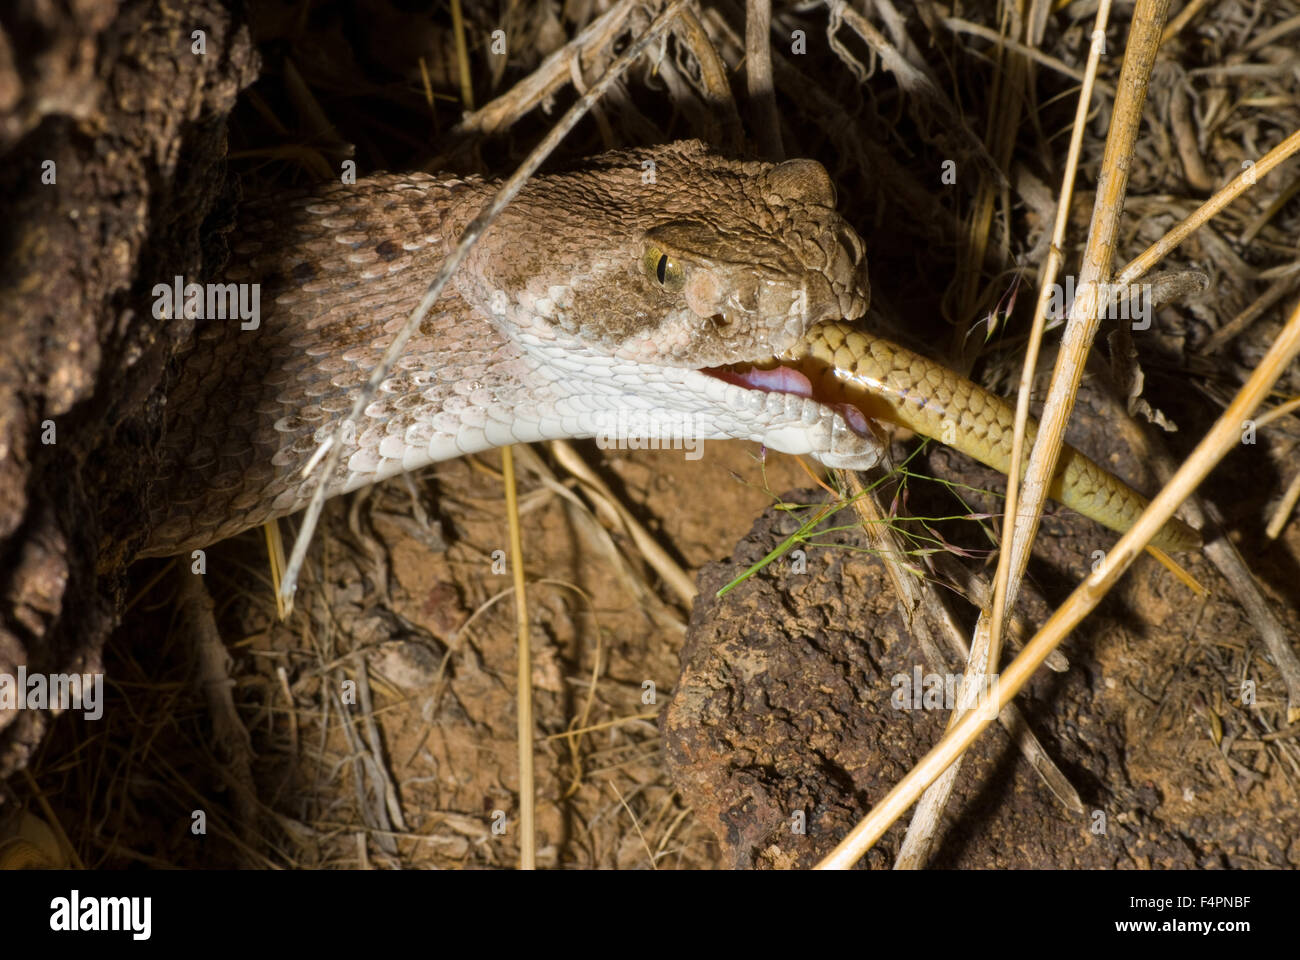 Western Diamond-backed Rattlesnake, (Crotalus atrox), eating a Great Plains Skink, (Plestiodon obsoletus) in New Mexico, USA. Stock Photo